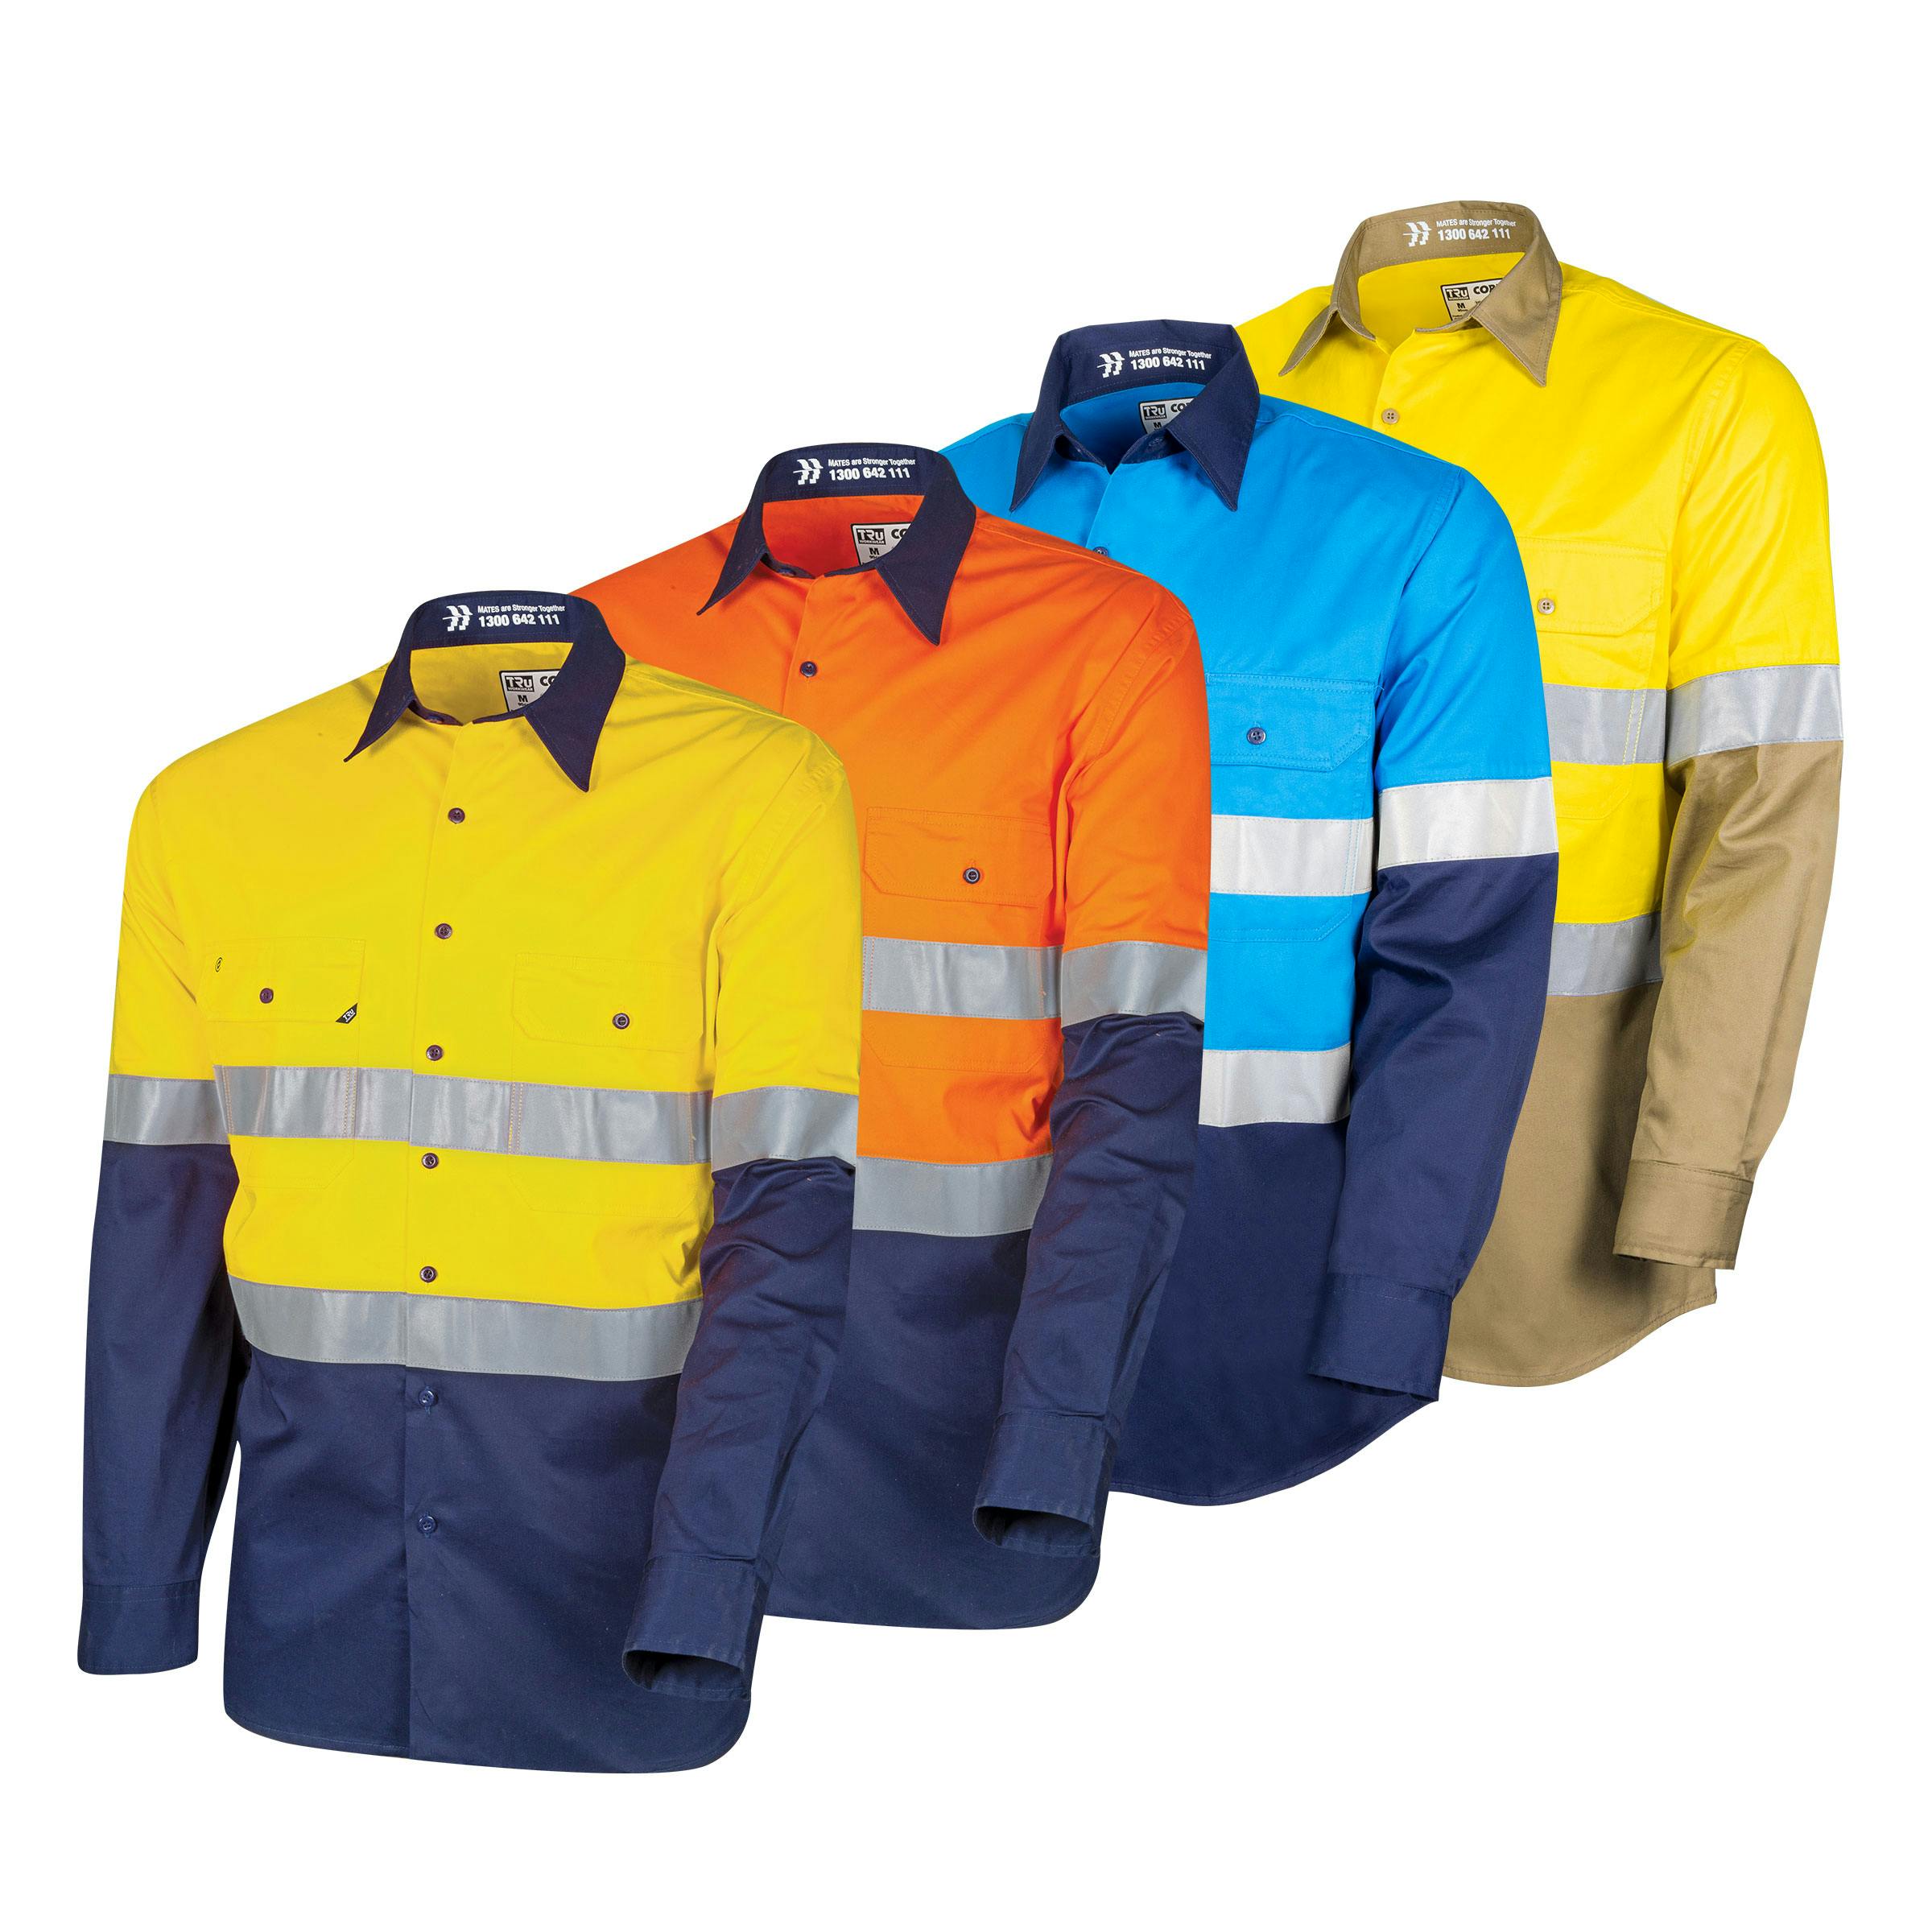 TRu Workwear Core Series Shirt 145gsm L/S 2 Tone Cotton Drill with Horizontal Cooling Vents and Tru HI Vis Ref. Tape in 2 Hoop Pattern  